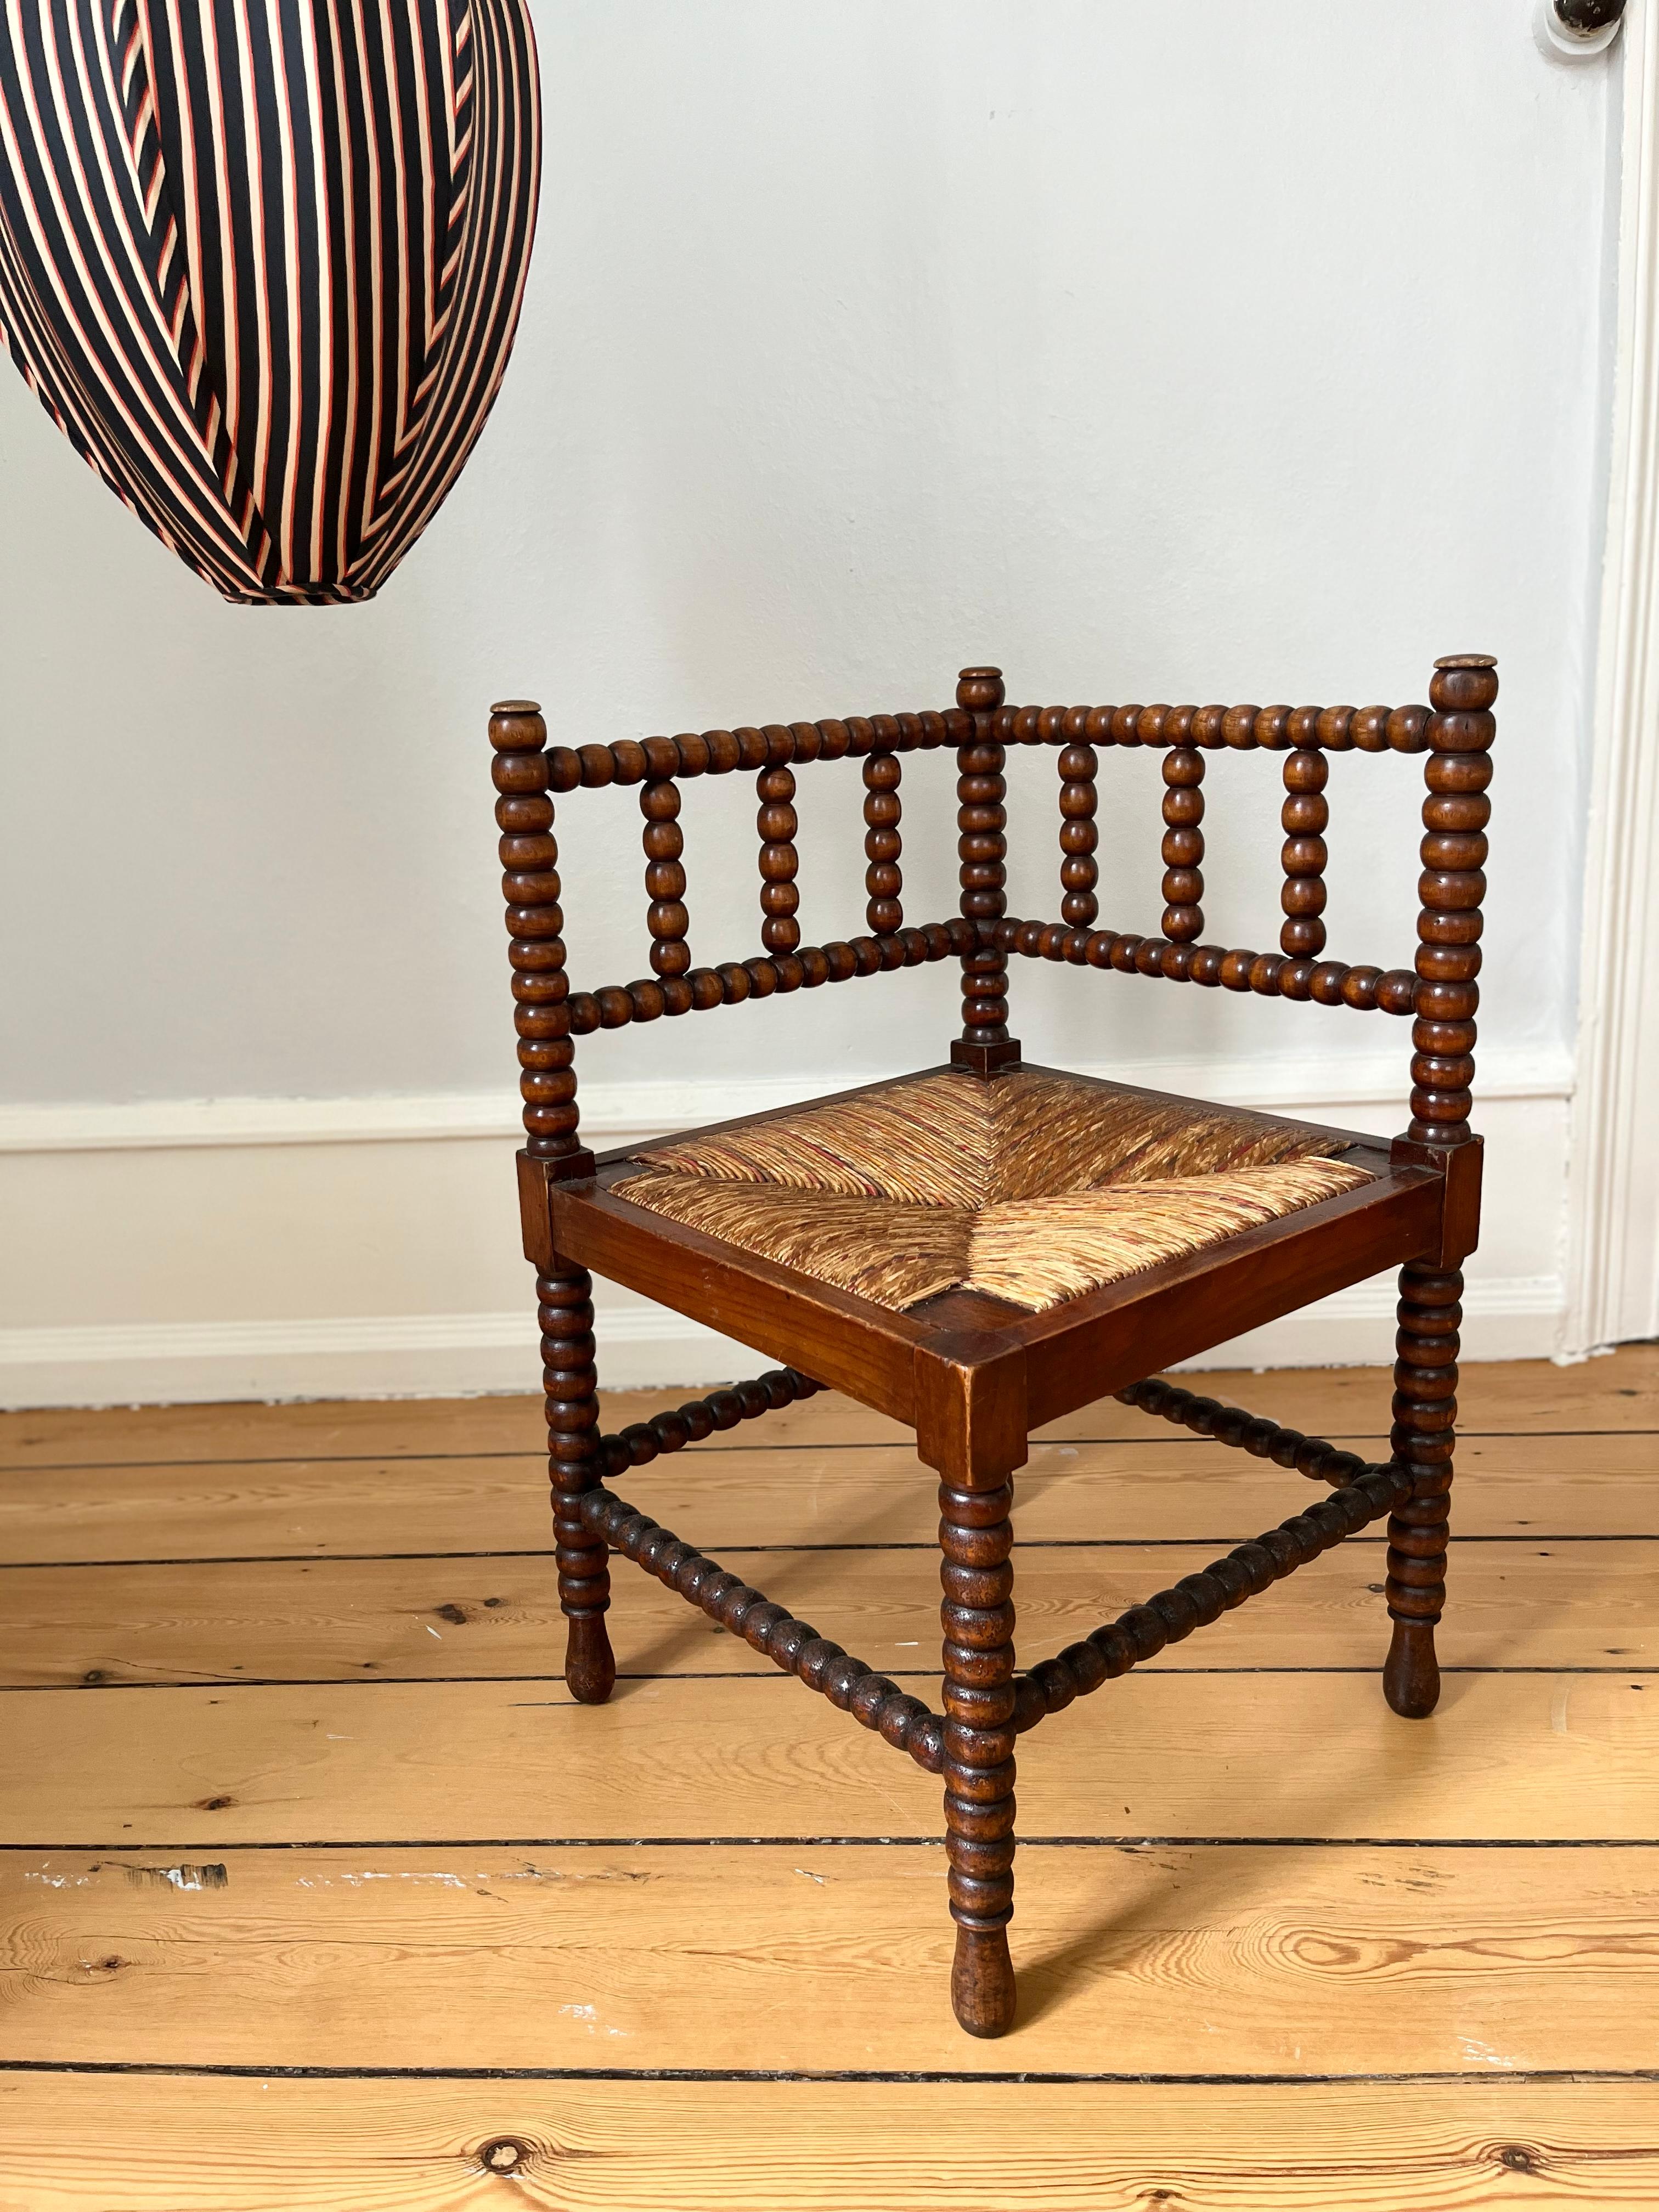 Perfect for a hall or a corner in the dining room. British antique bobbin turned corner chair with a rush seat. Please note that the seat height is lower than a dining chair, more like a lounge chair. 
In very good condition considering it's age,